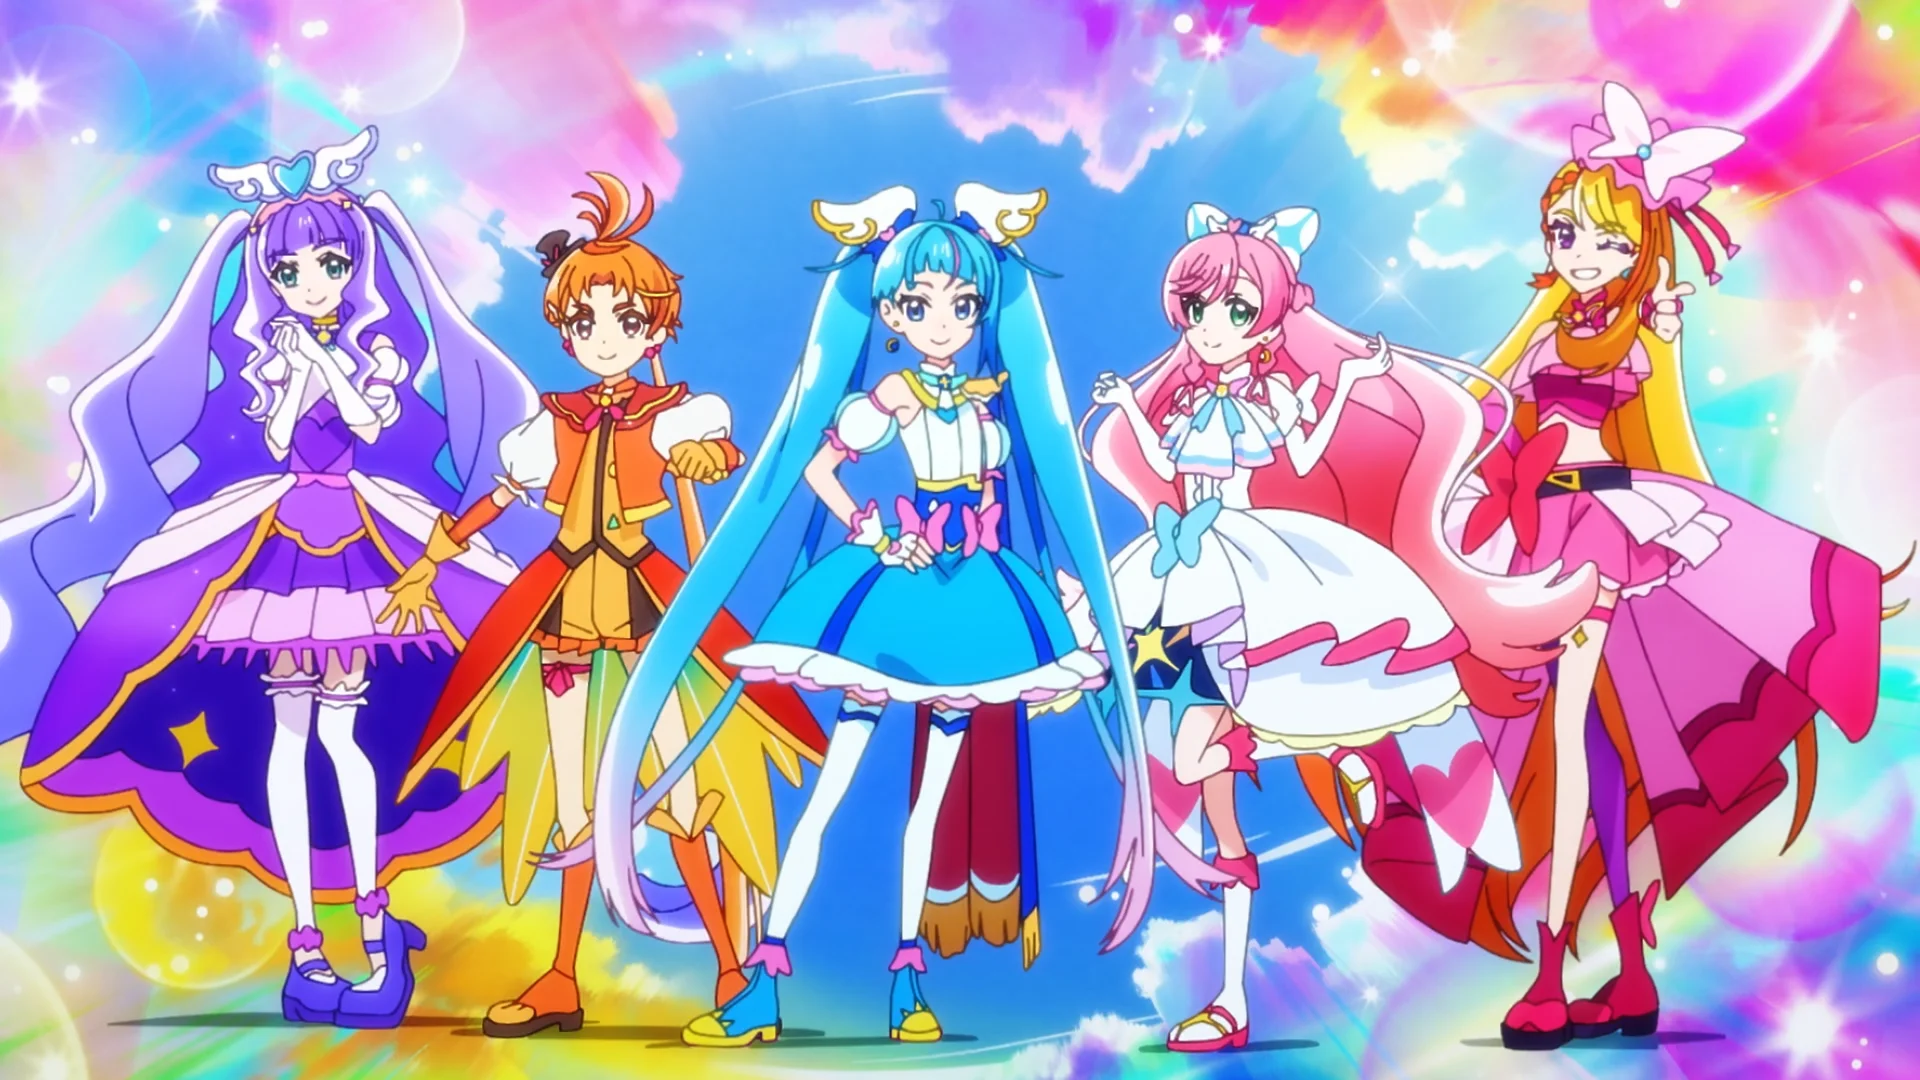 Cure Majesty, Cure Wing, Cure Sky, Cure Prism, and Cure Butterfly